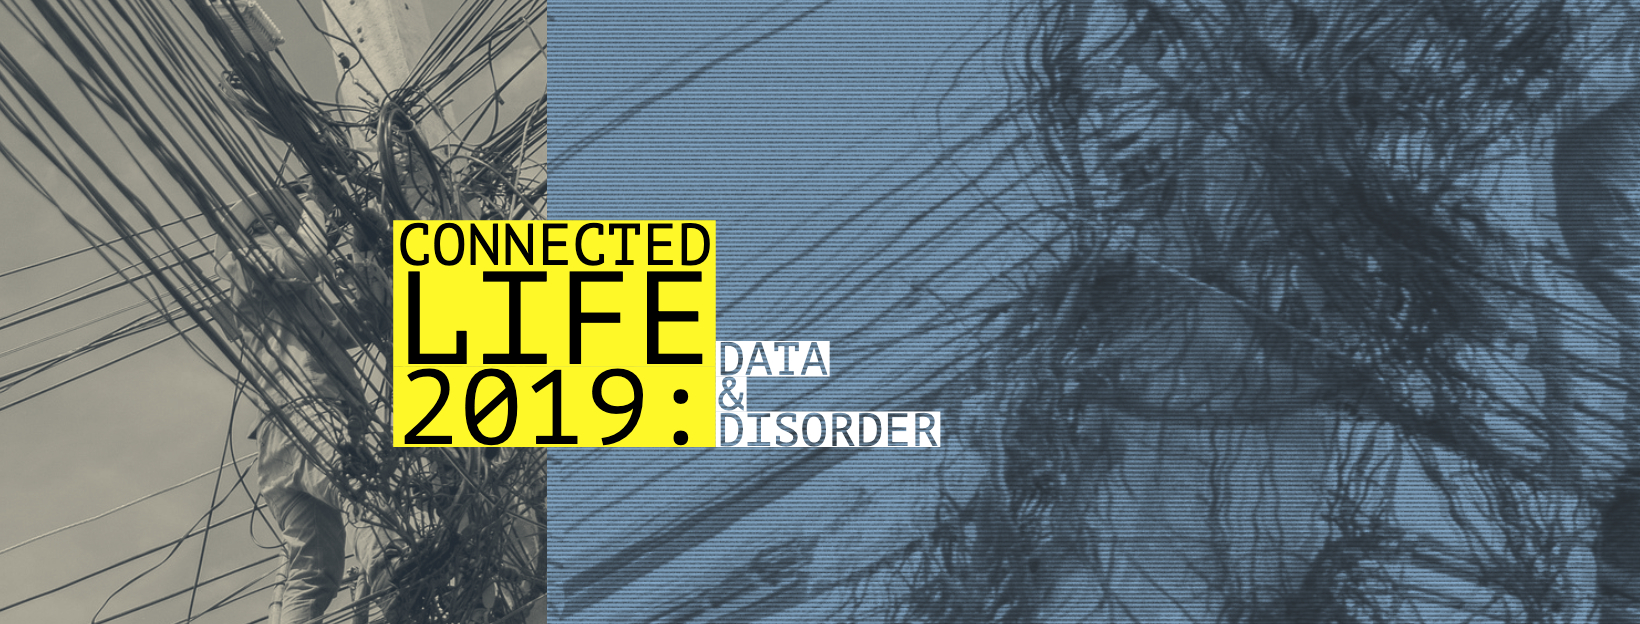 Connected Life Conference Call for Papers Deadline